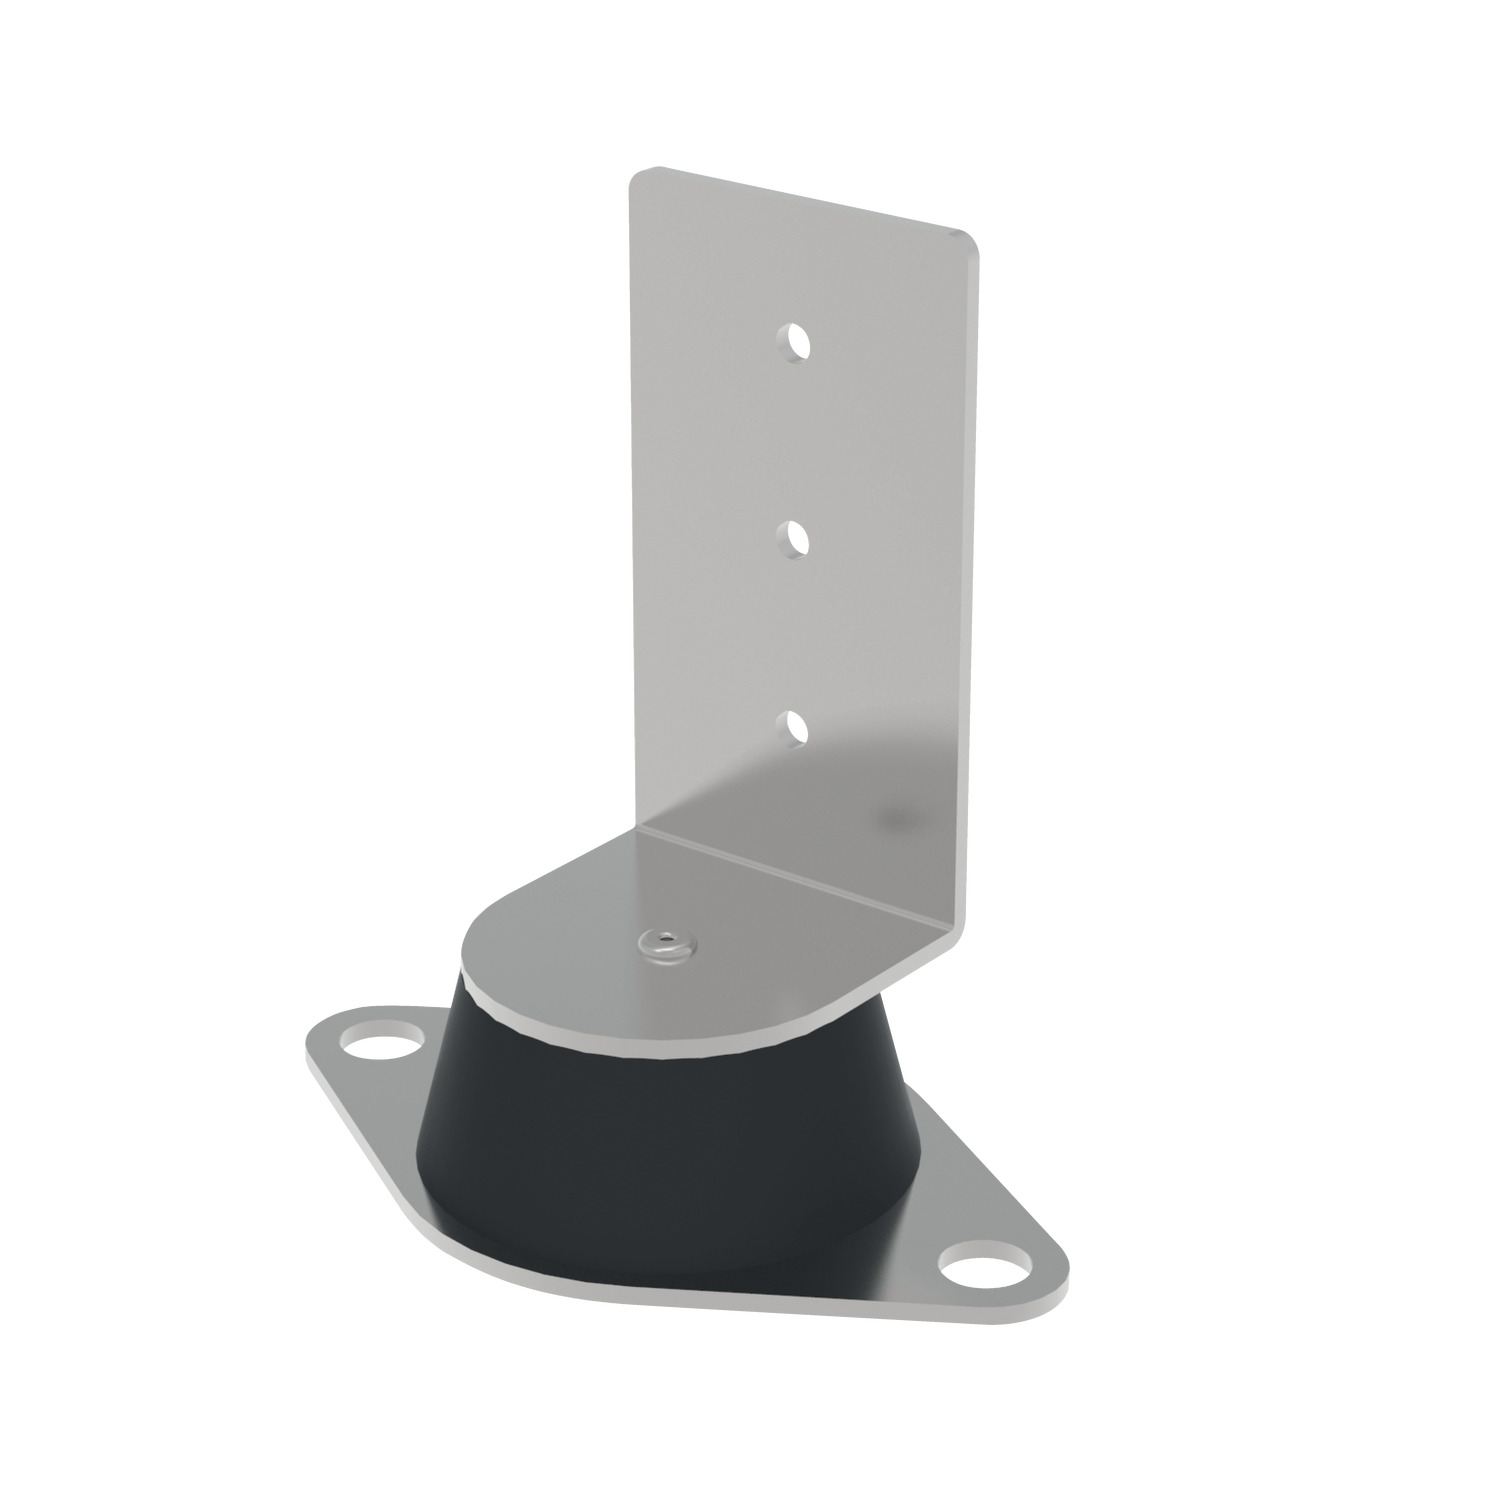 61936 Acoustic Wall Damper right angle fixing